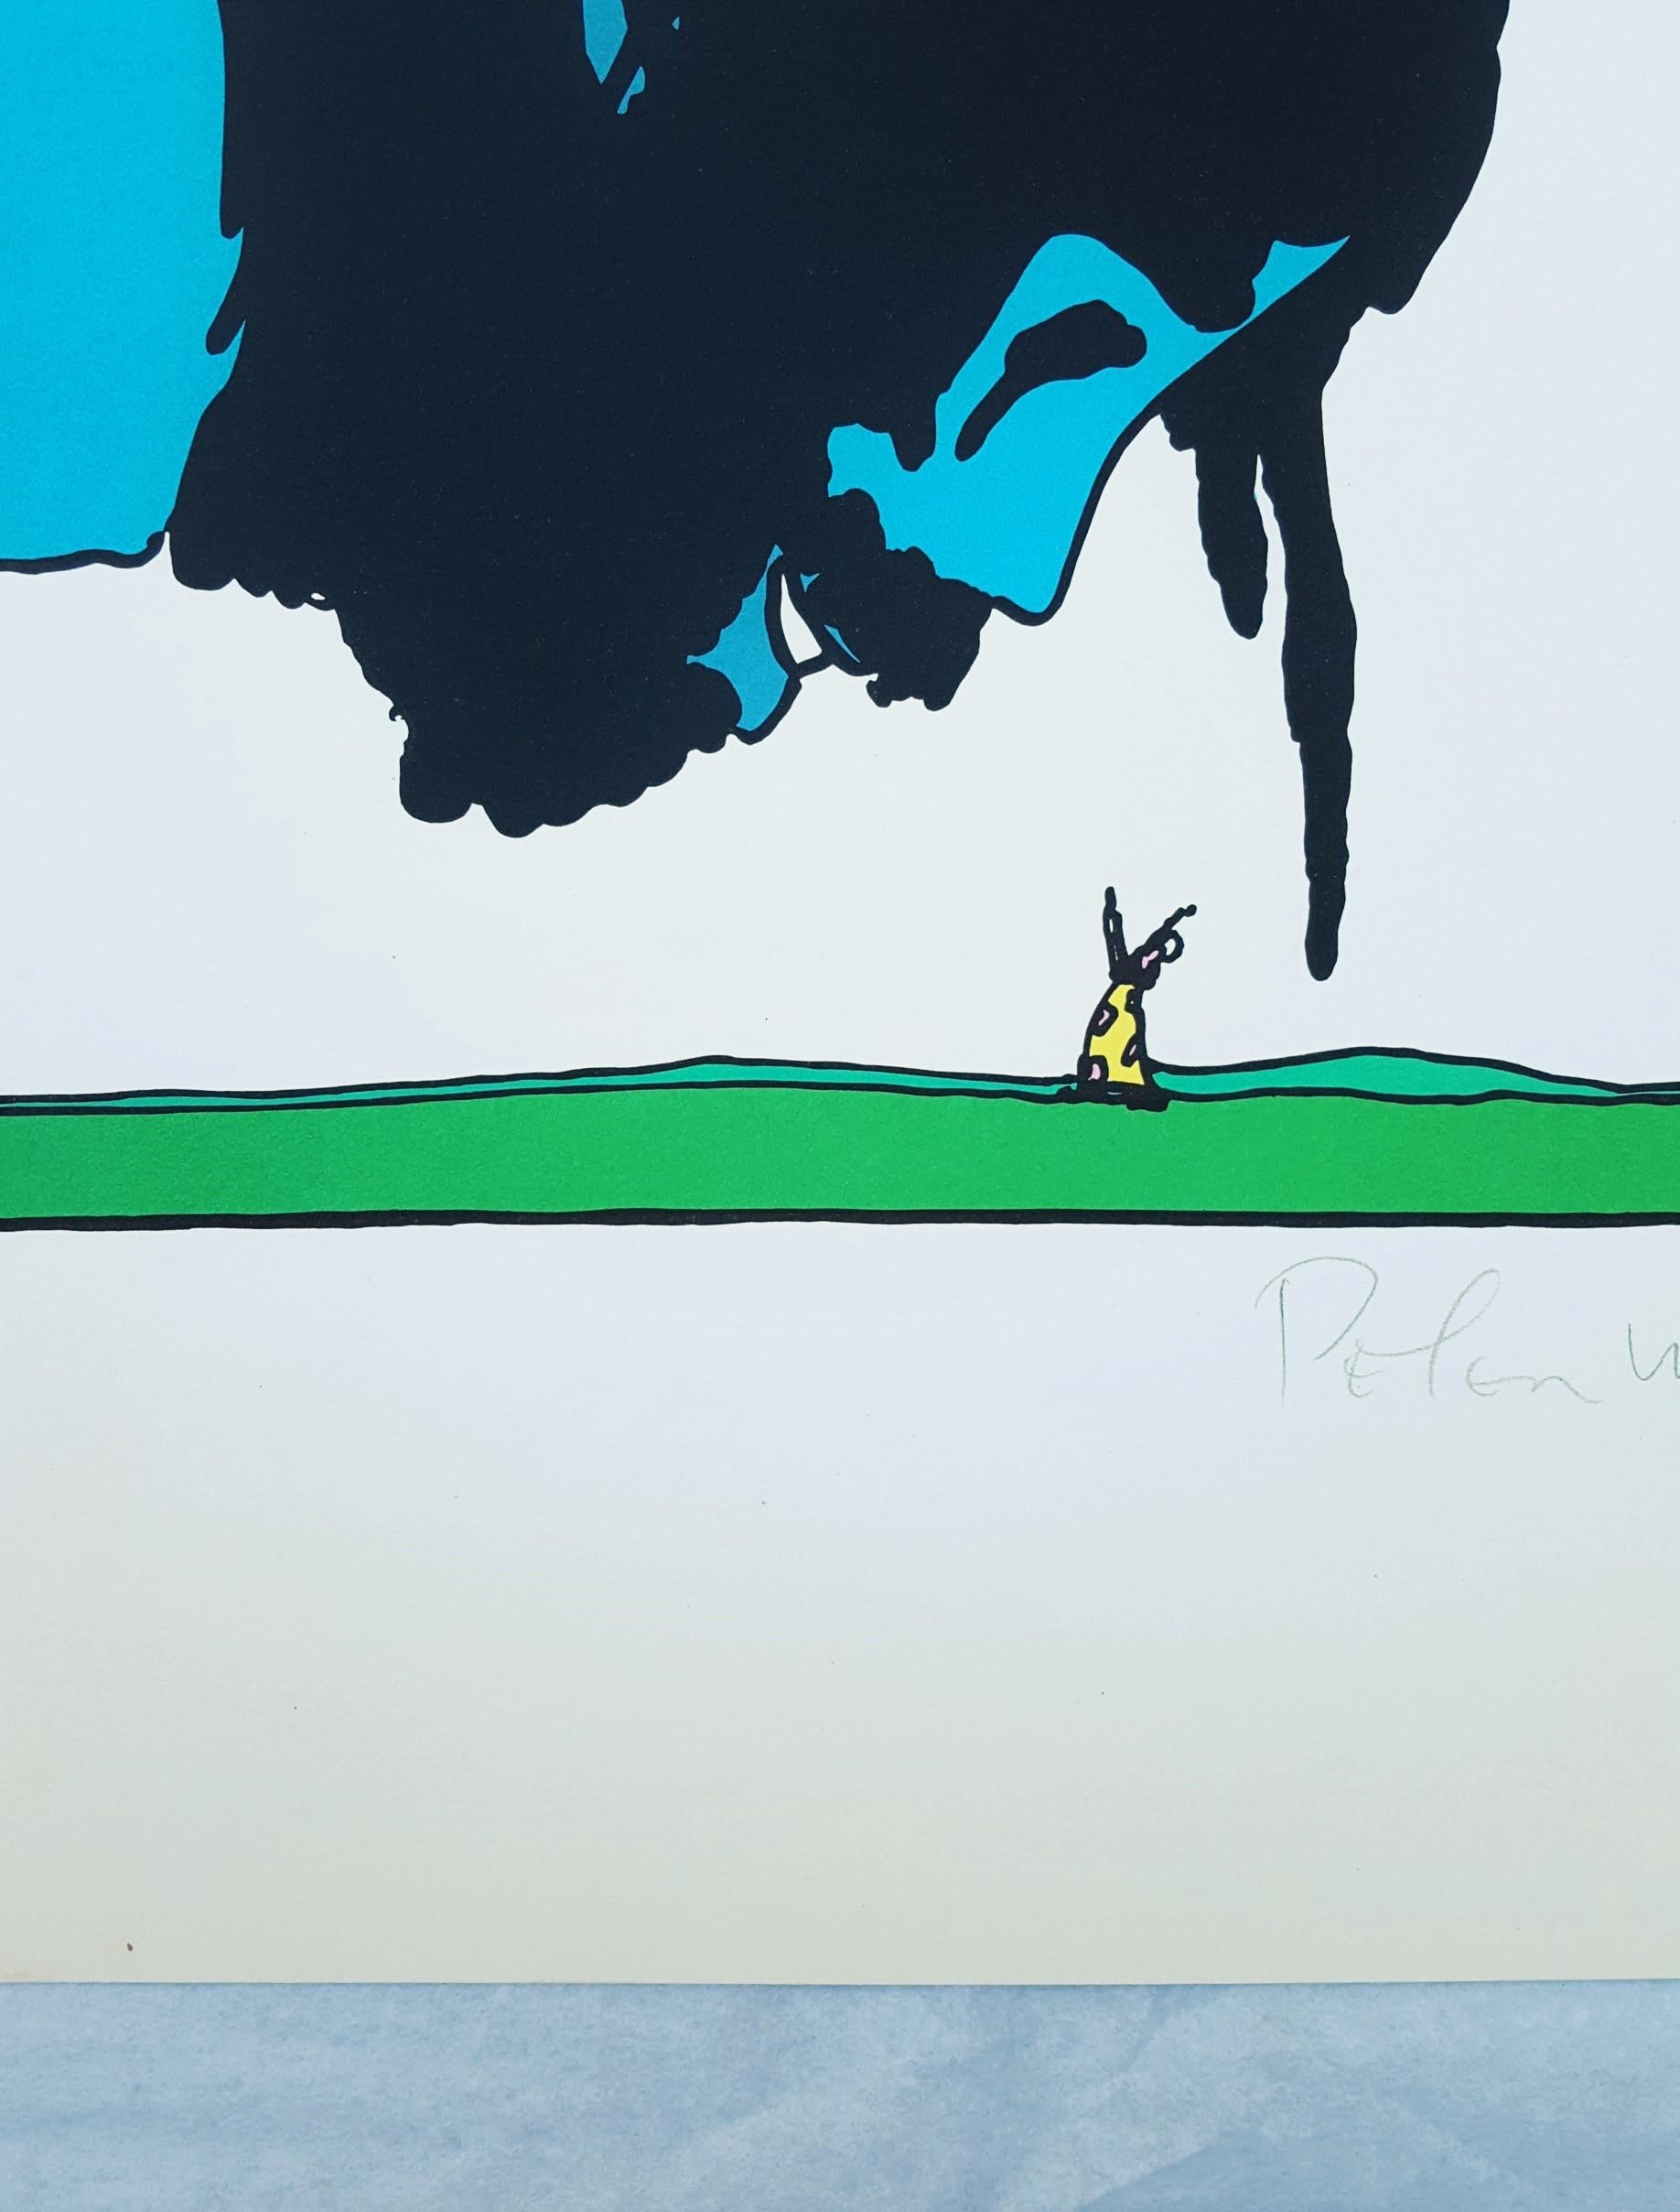 An original signed lithograph on American Atelier cover paper by German-American artist Peter Max (1937-) titled 